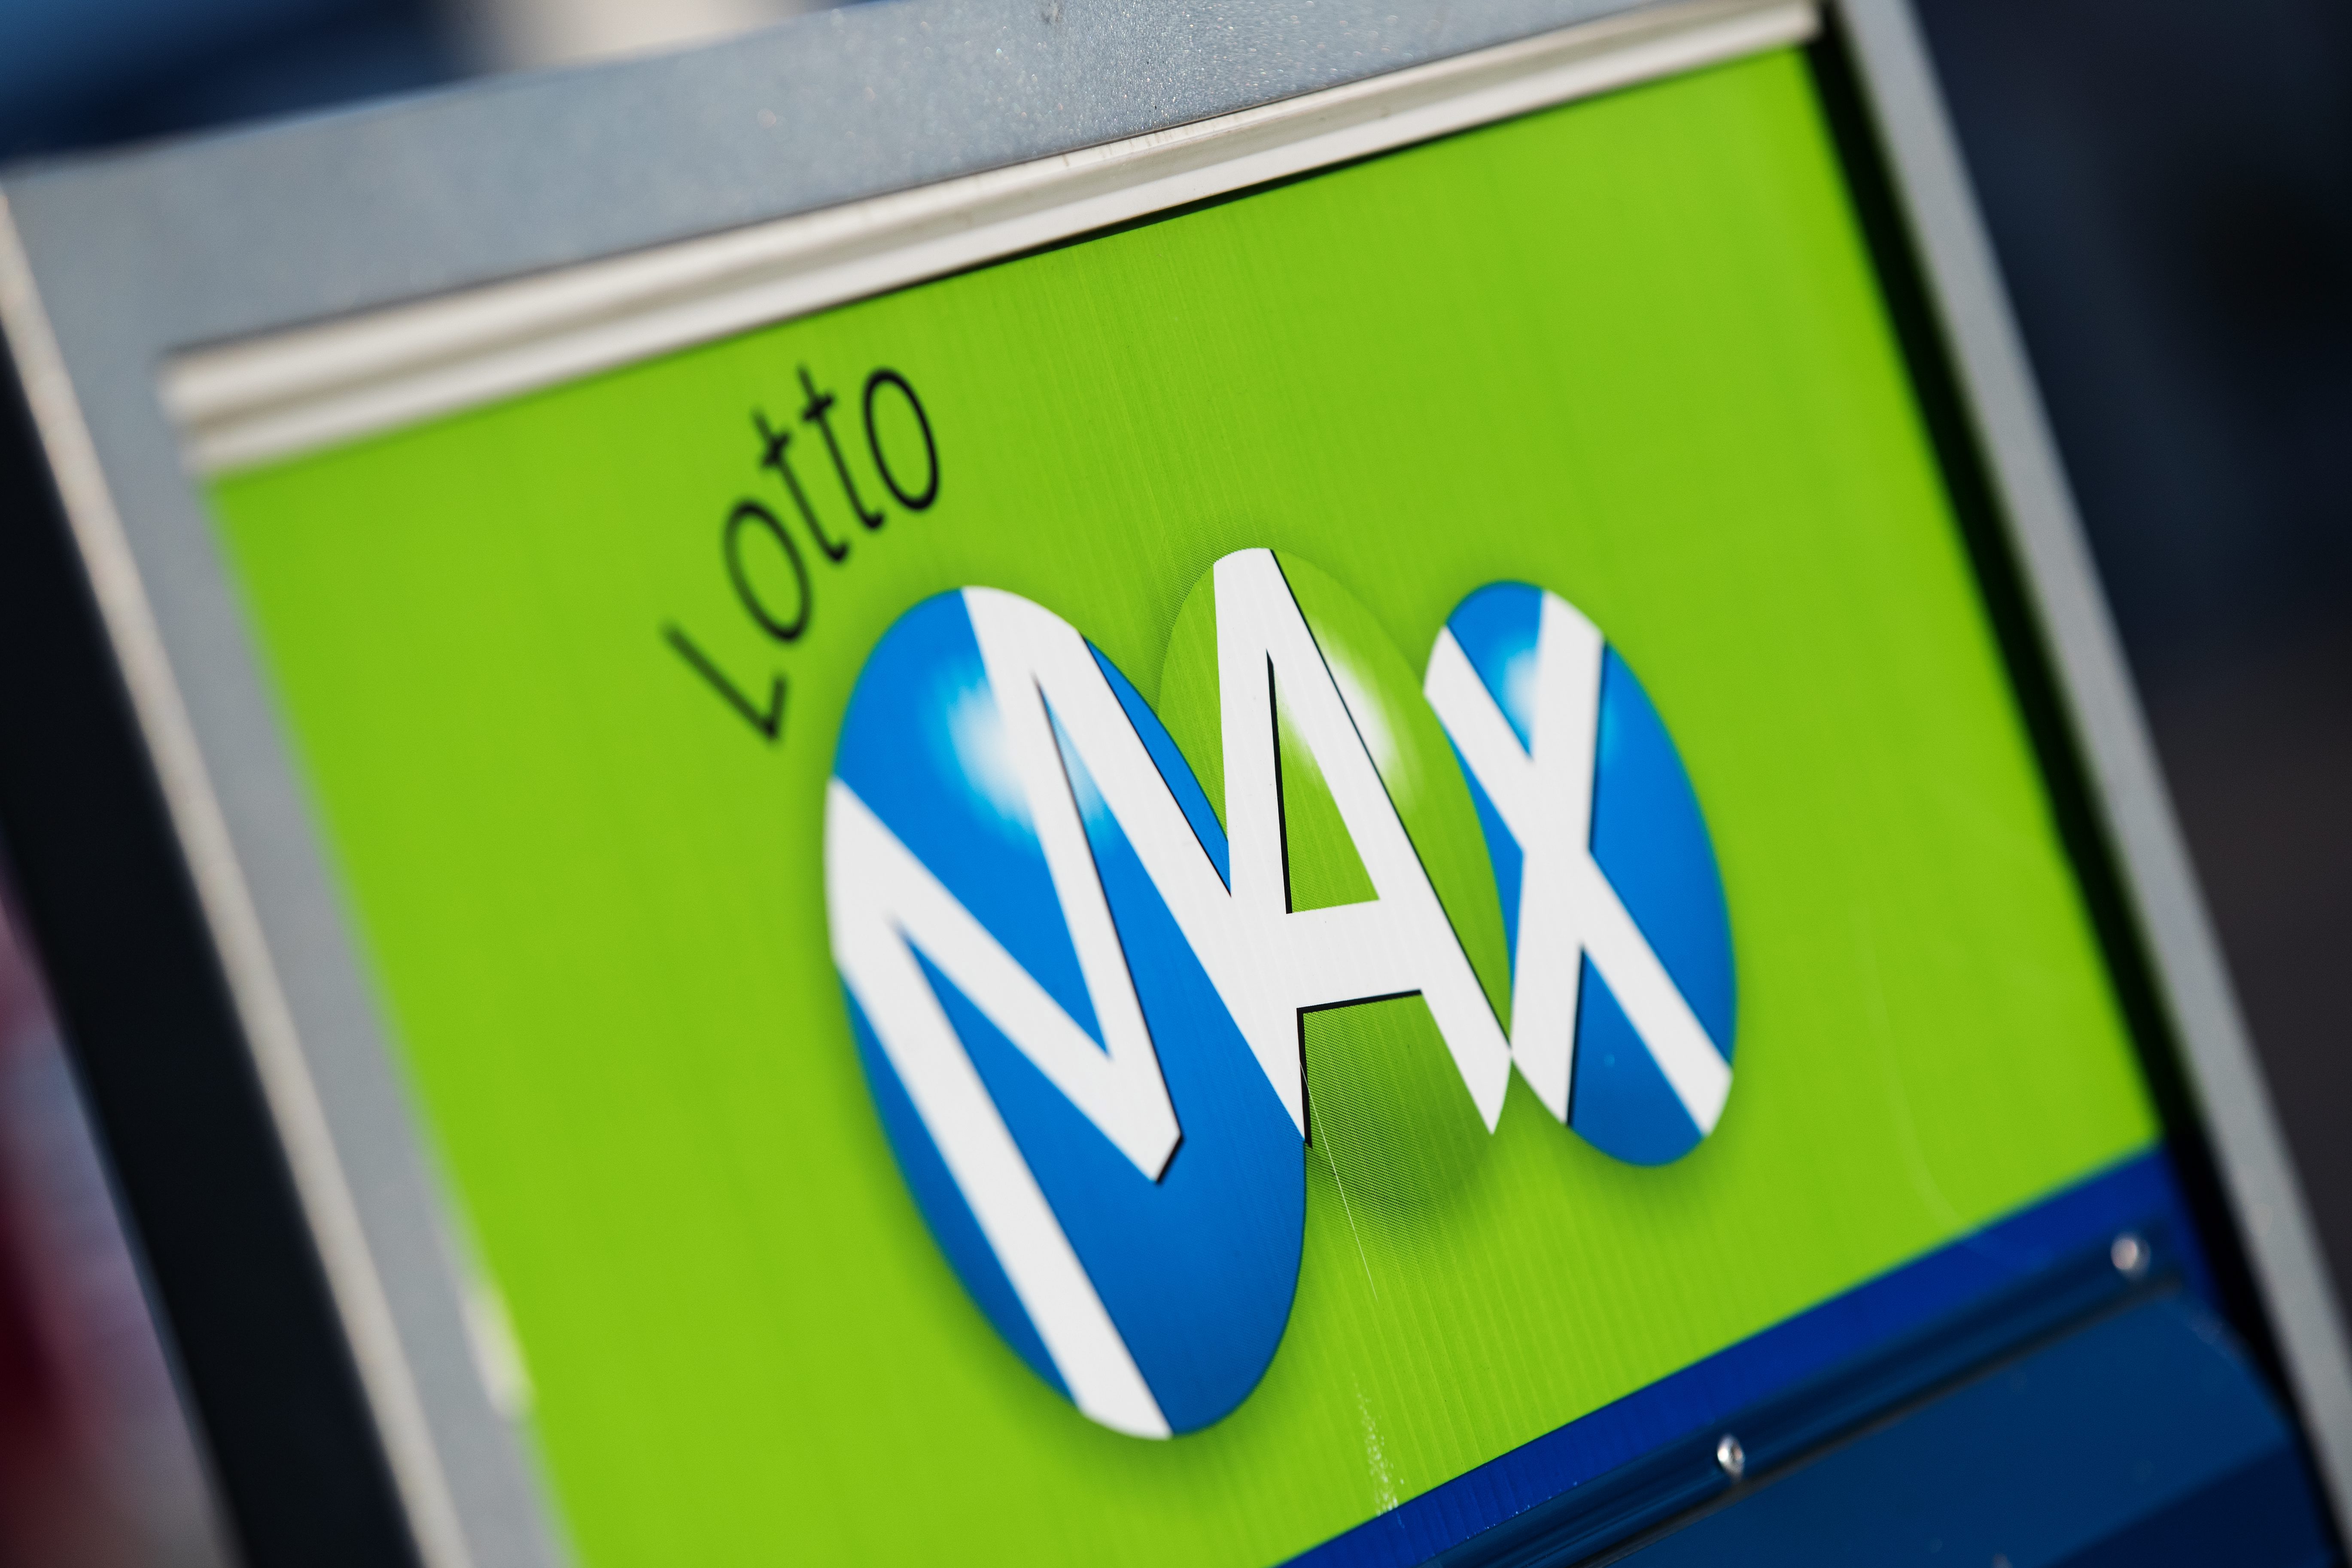 lotto max winning numbers for june 7 2019